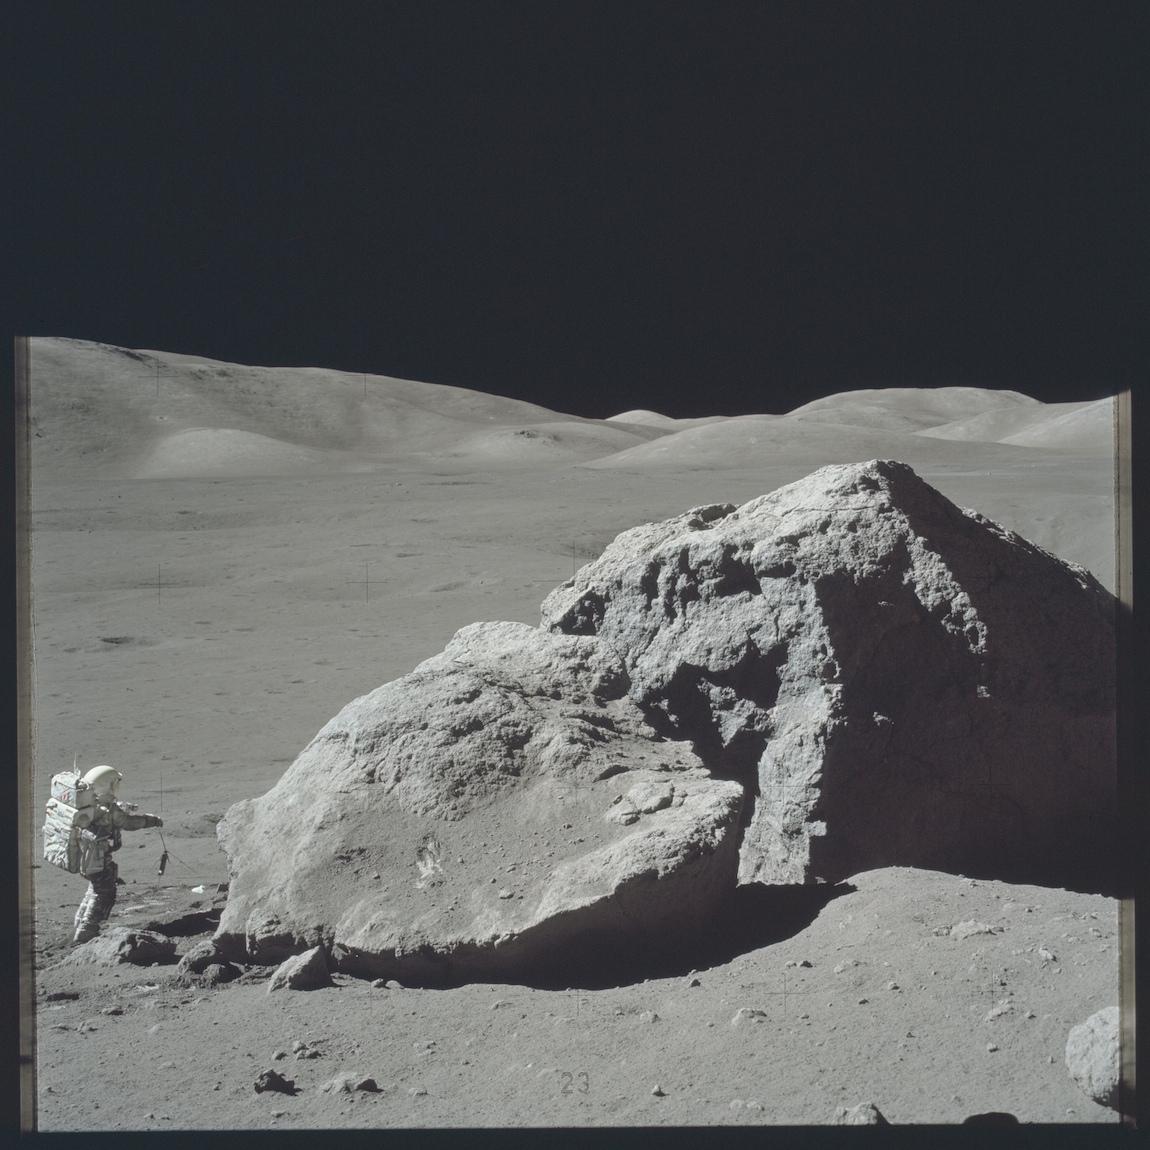 High Res Image From The Apollo Moon Missions Were Just Put